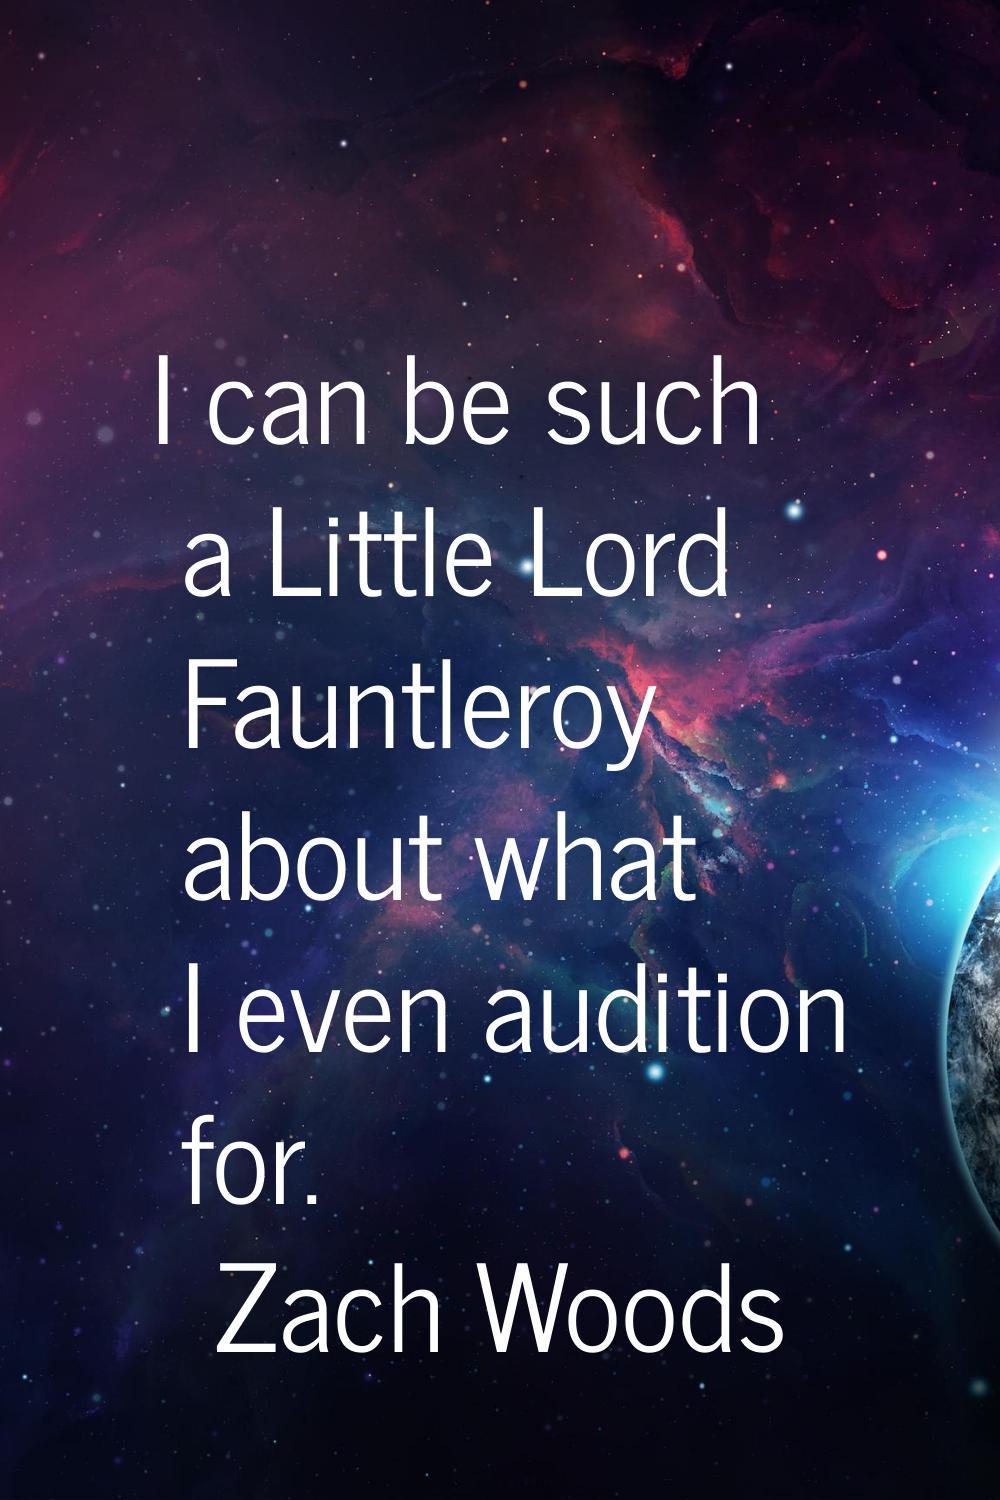 I can be such a Little Lord Fauntleroy about what I even audition for.